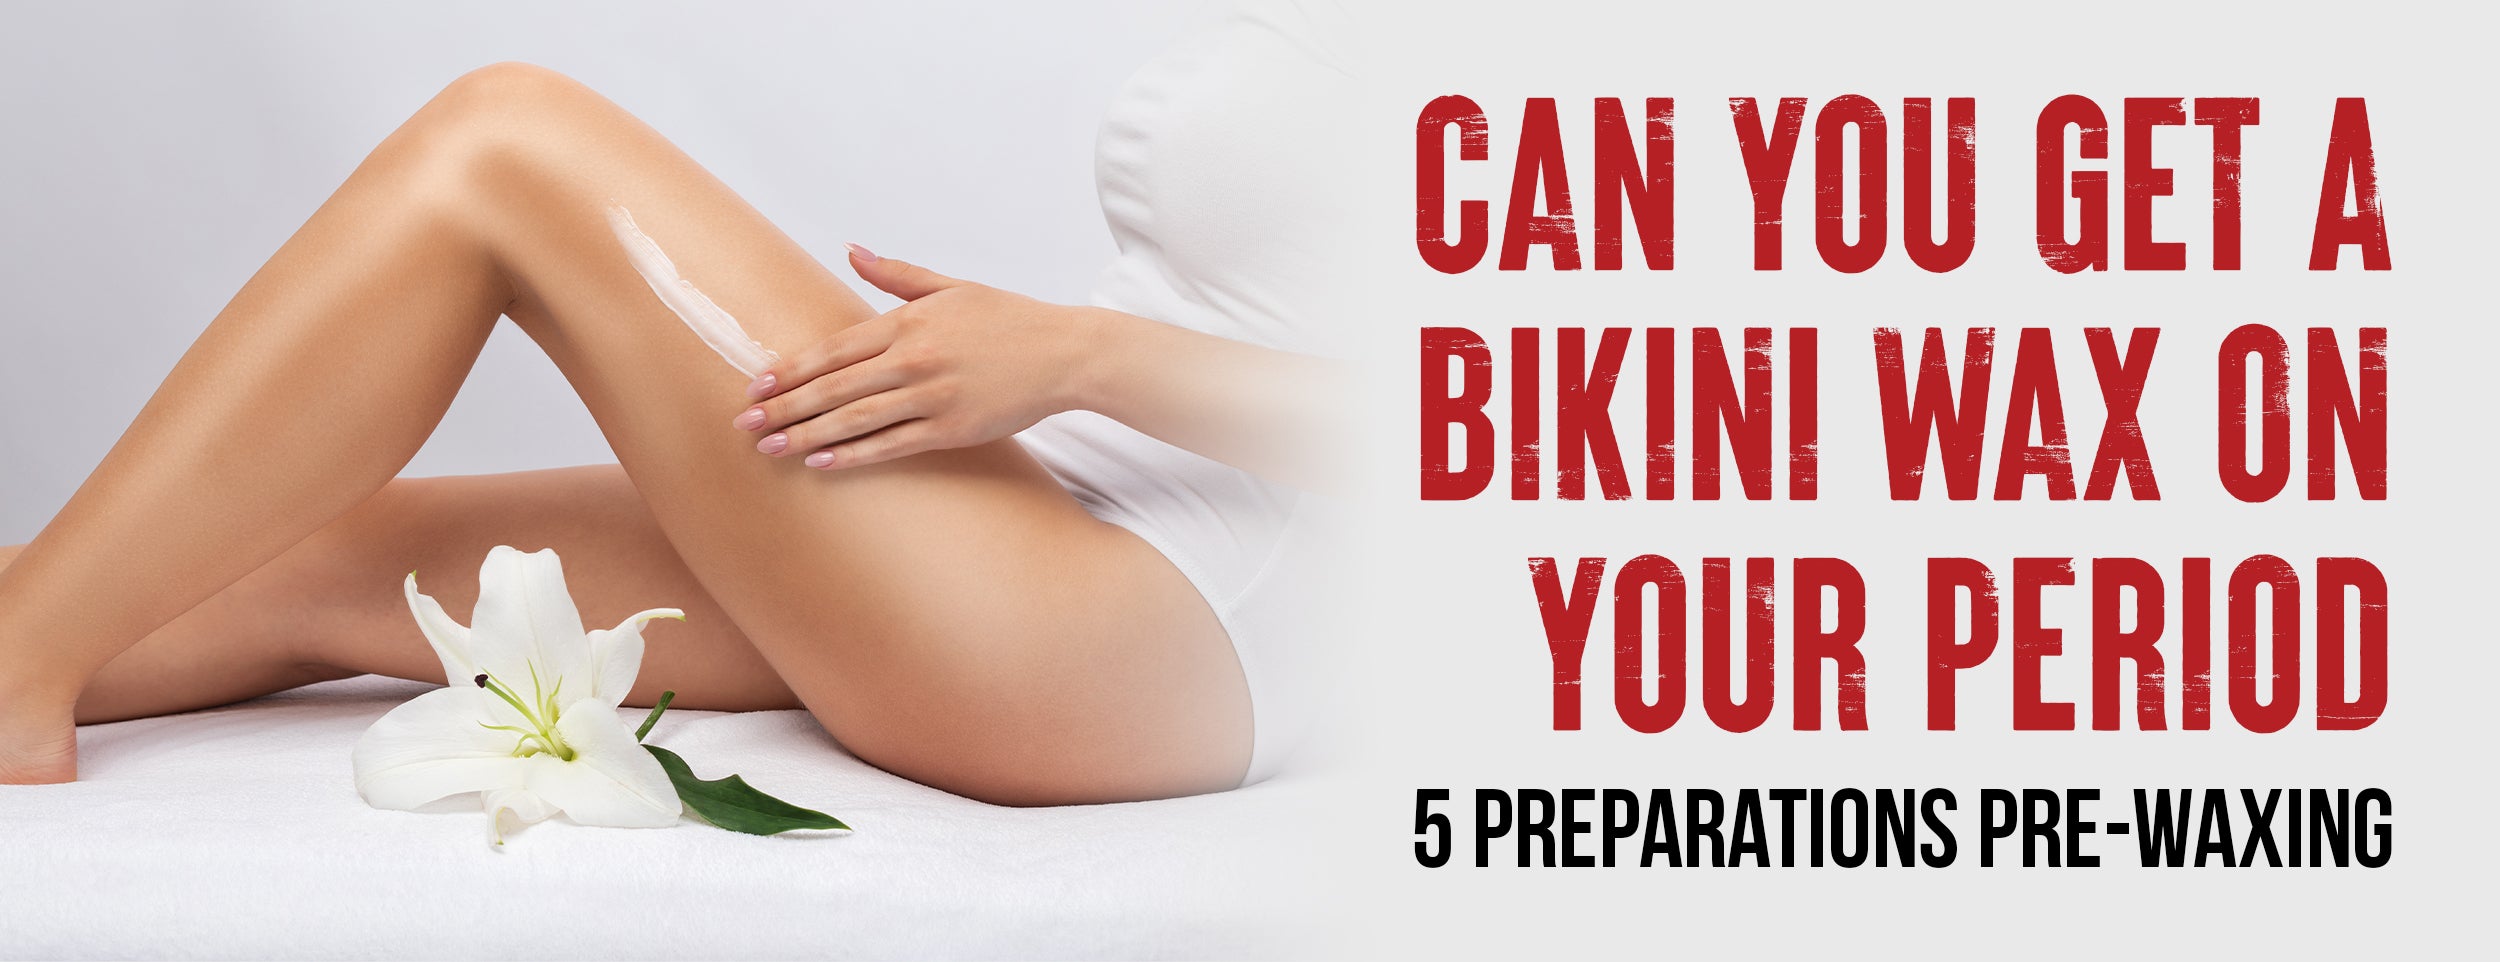 5 Pre-Waxing Preparations & 4 Things To Consider Before Getting A Bikini Wax On Your Period